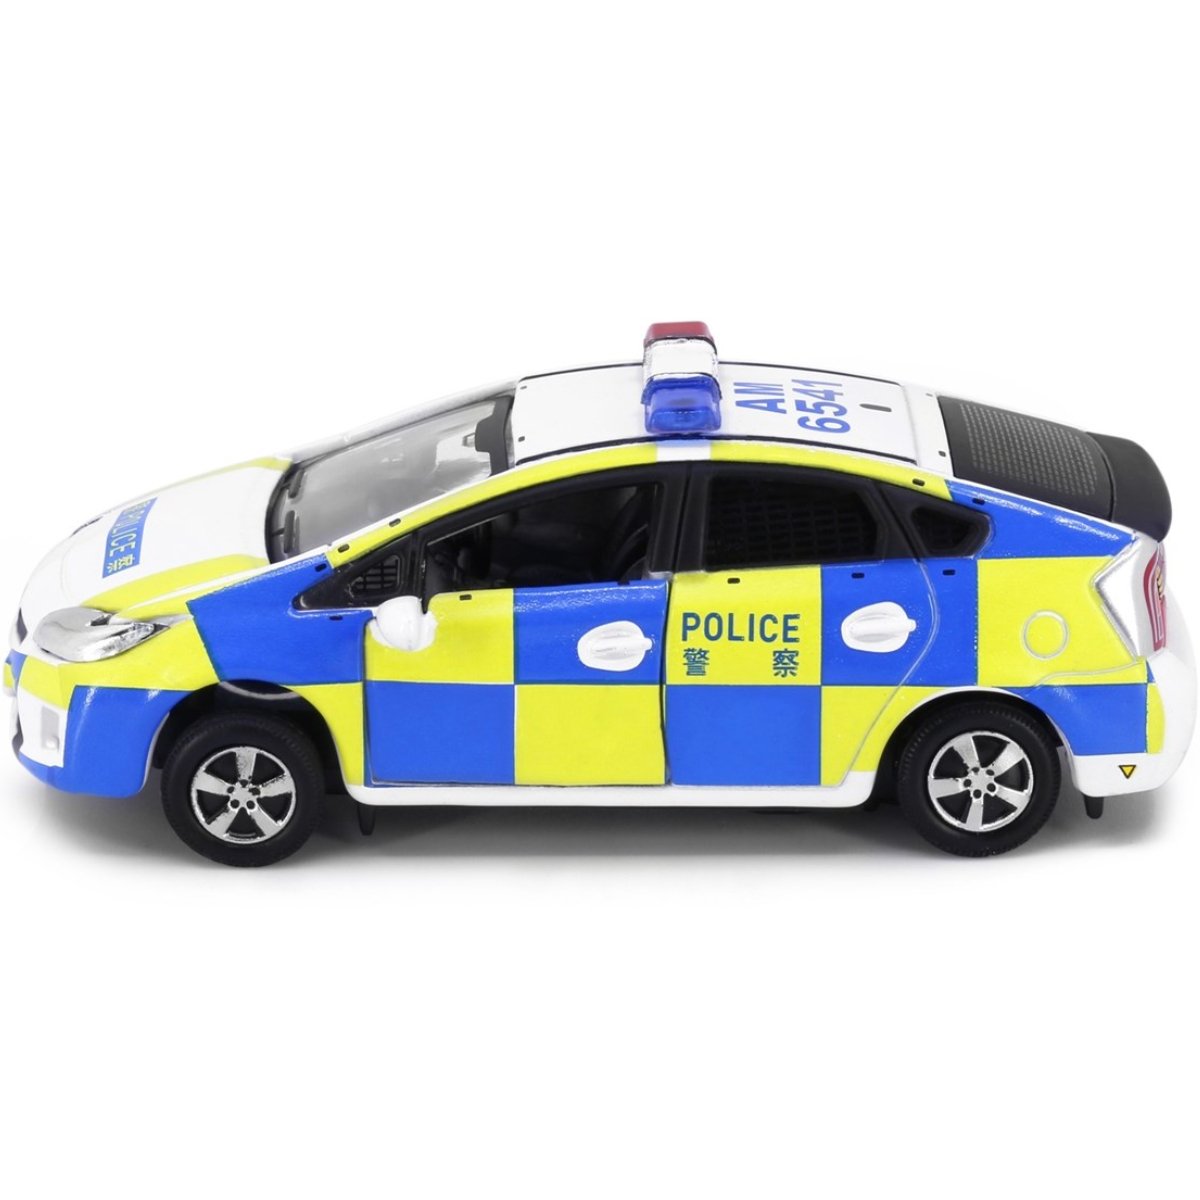 Tiny Models Toyota Prius Hong Kong Police (1:64 Scale) - Phillips Hobbies